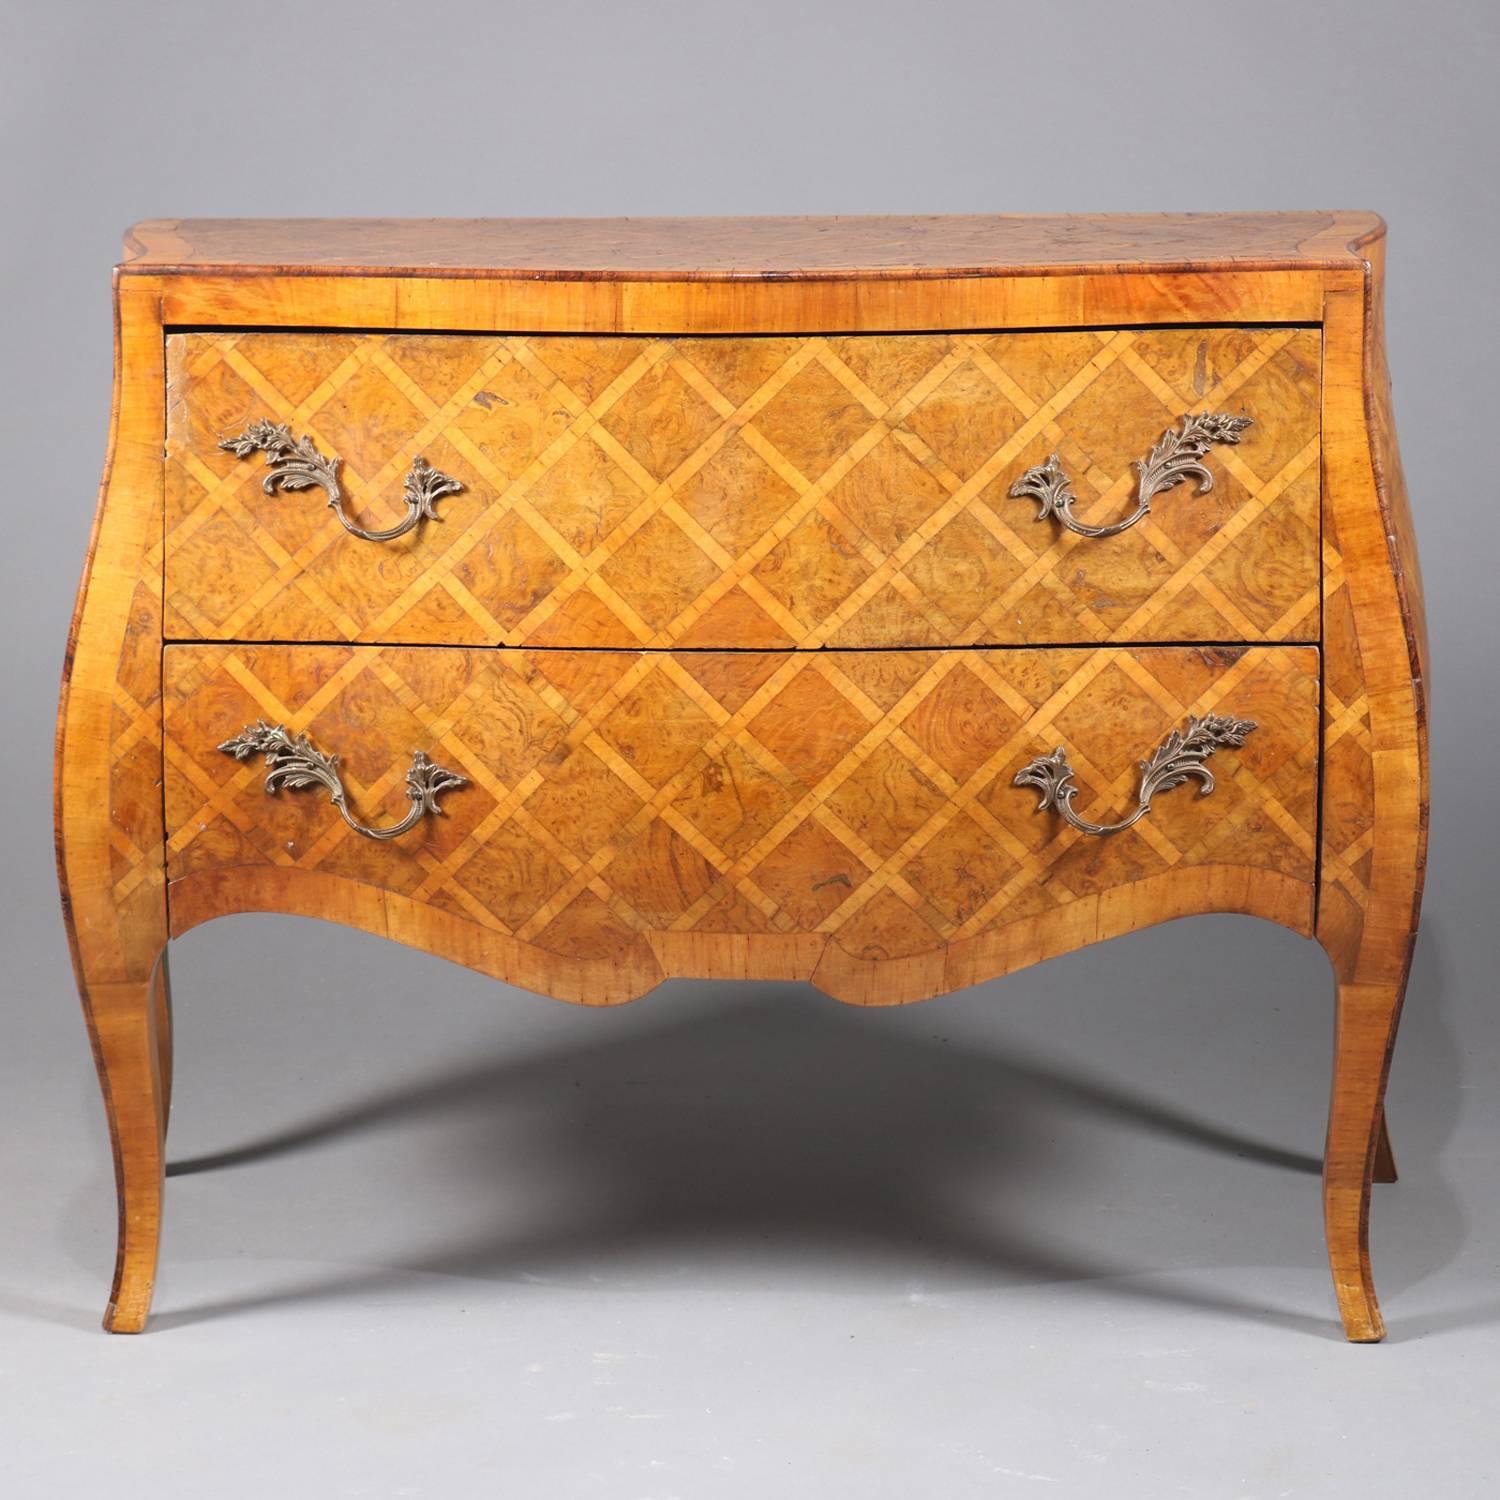 Antique Italian kingwood and burled parquetry two-drawer chest features Bombe form with scalloped skirt and raised on tapered cabriole legs, foliate form cast bronze pulls throughout, 20th century

Measures: 24.25